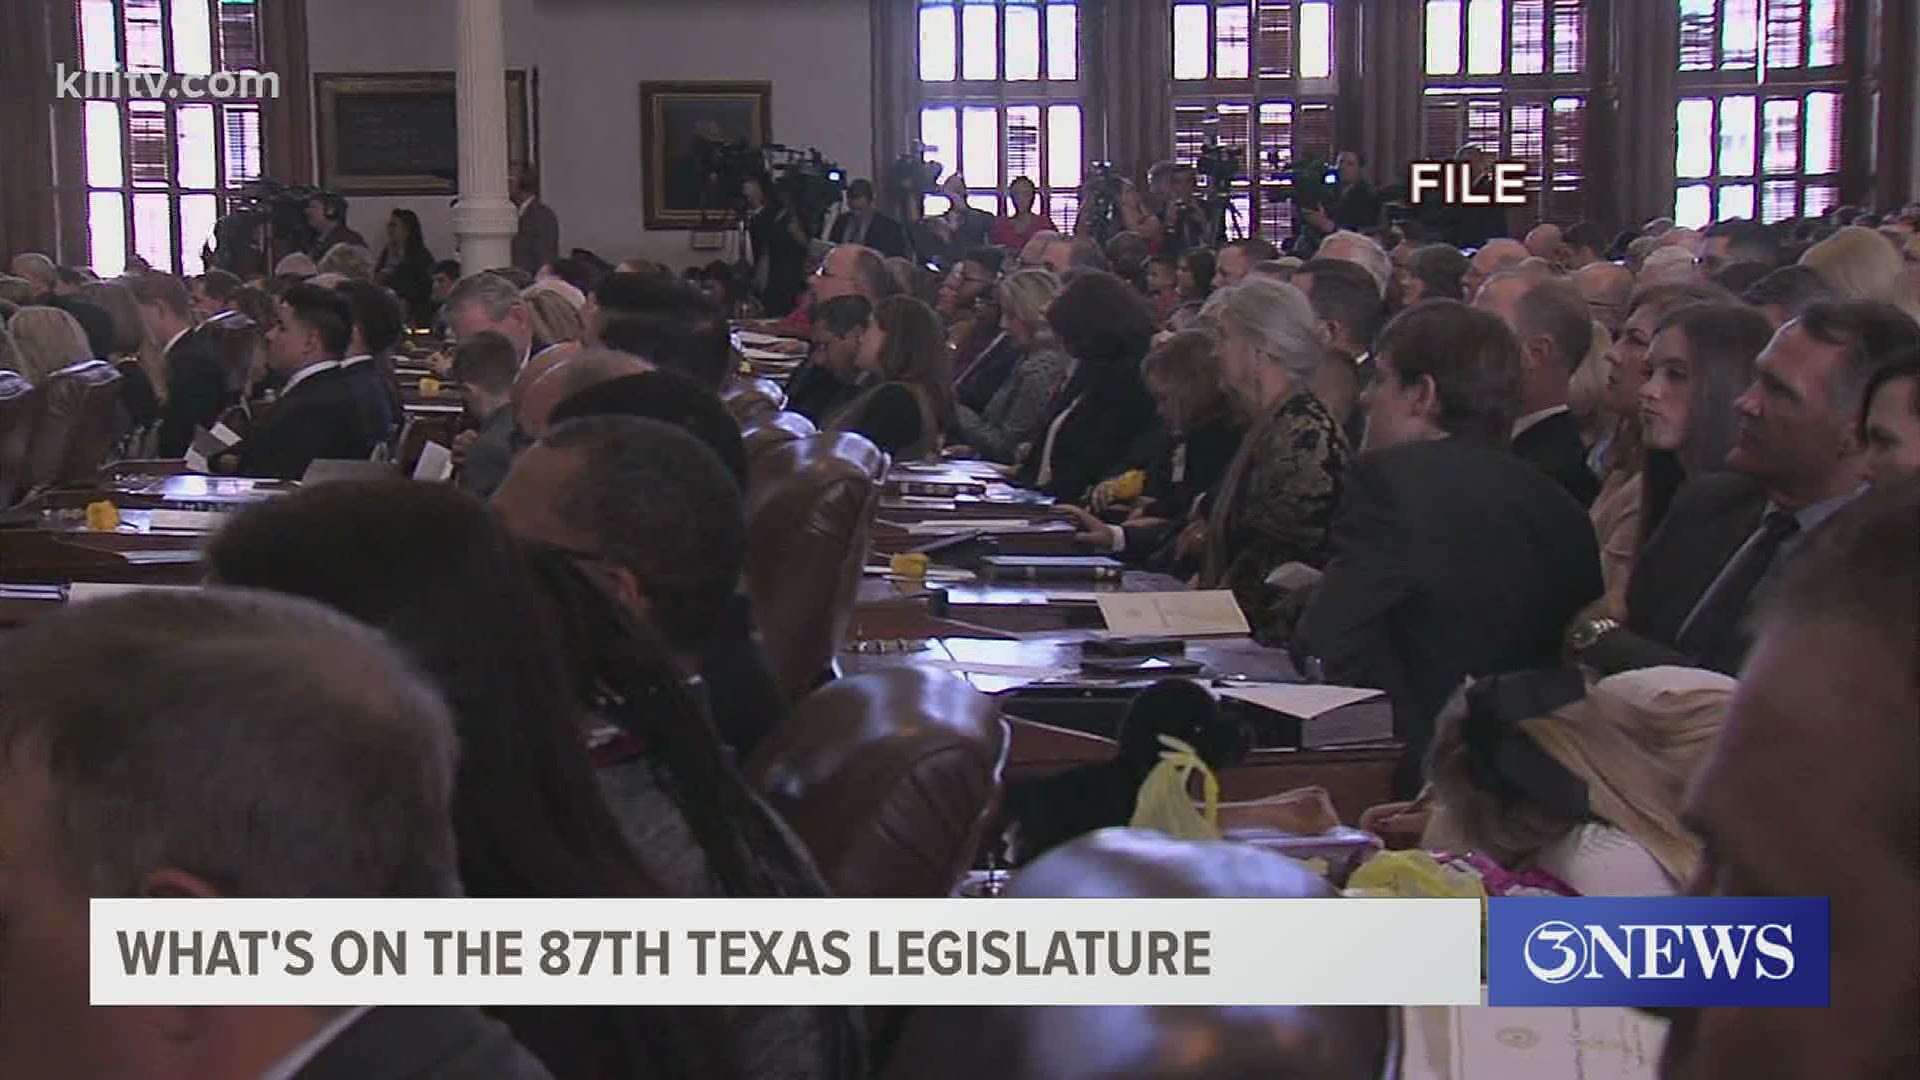 Texas Lawmakers have started pre-submitting bills for the 87th Legislative Session.